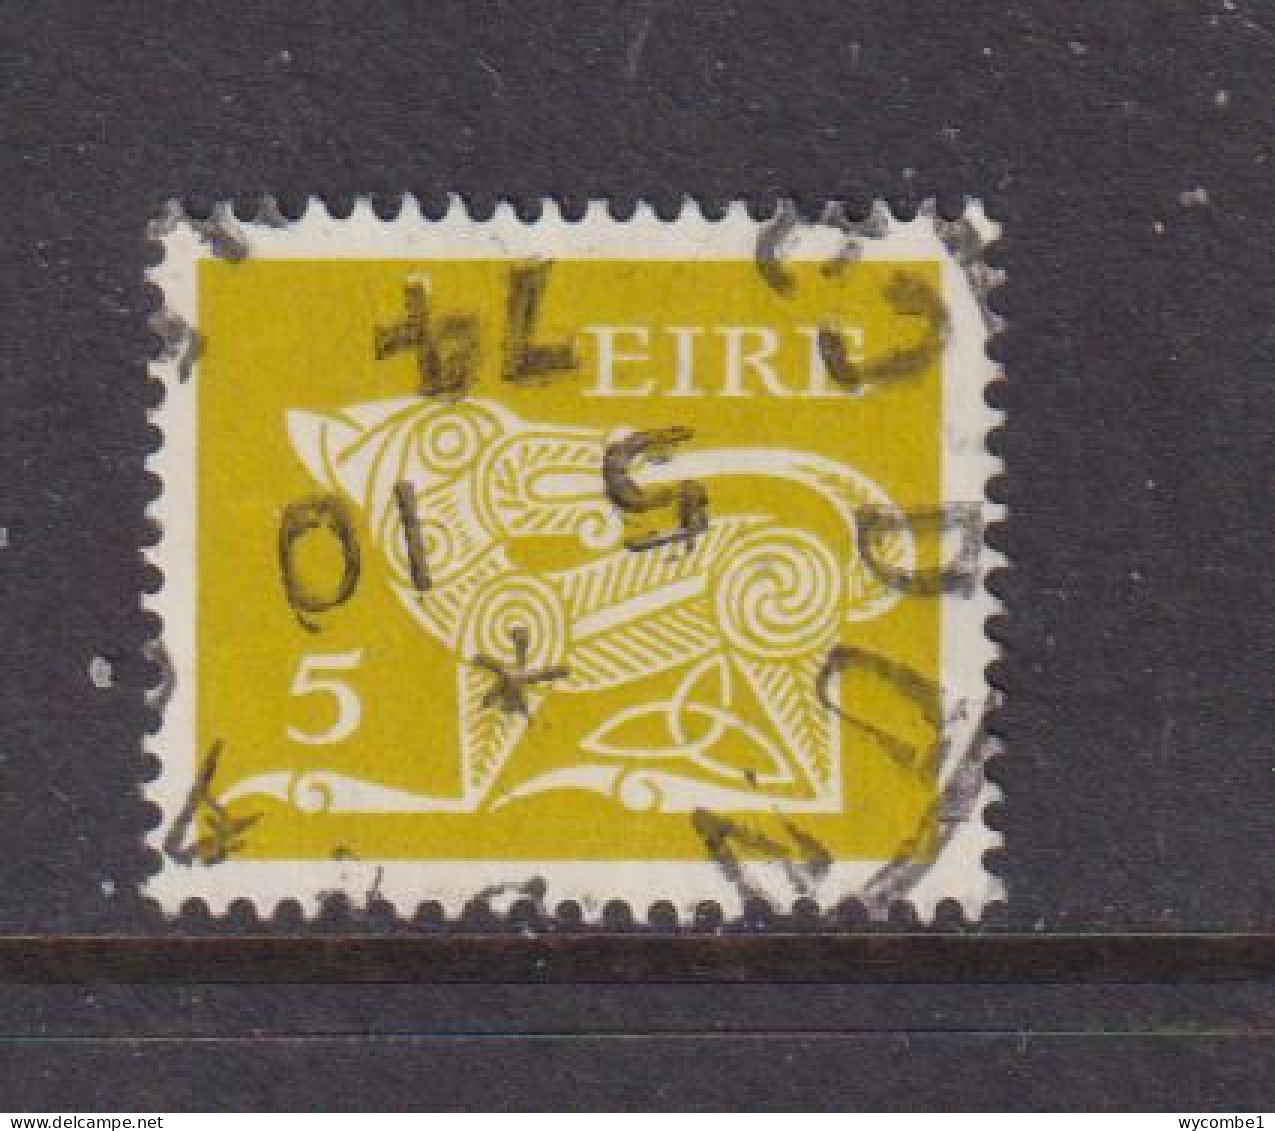 IRELAND - 1971  Decimal Currency Definitives  5p  Used As Scan - Usati